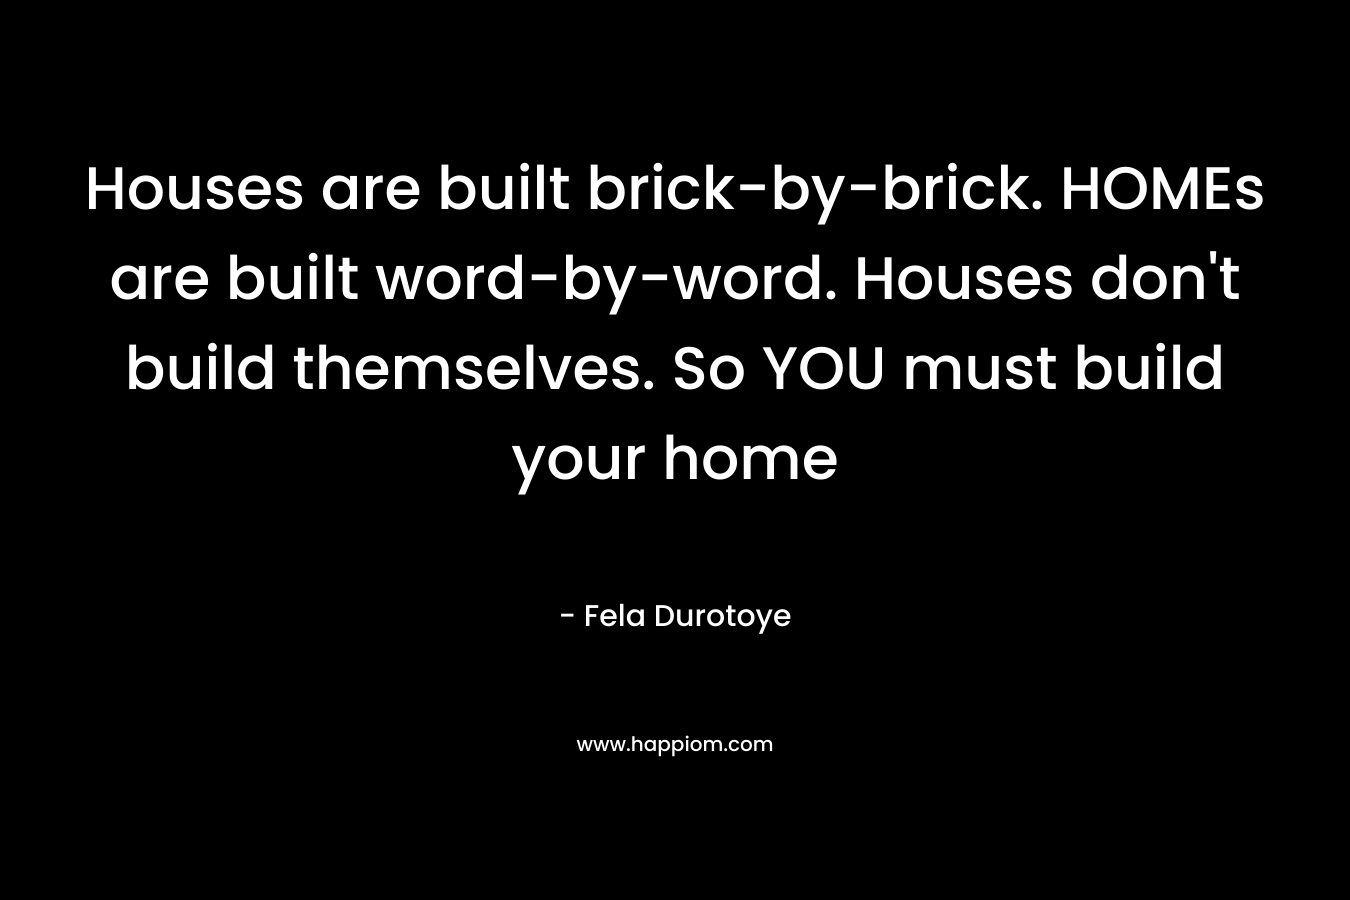 Houses are built brick-by-brick. HOMEs are built word-by-word. Houses don't build themselves. So YOU must build your home